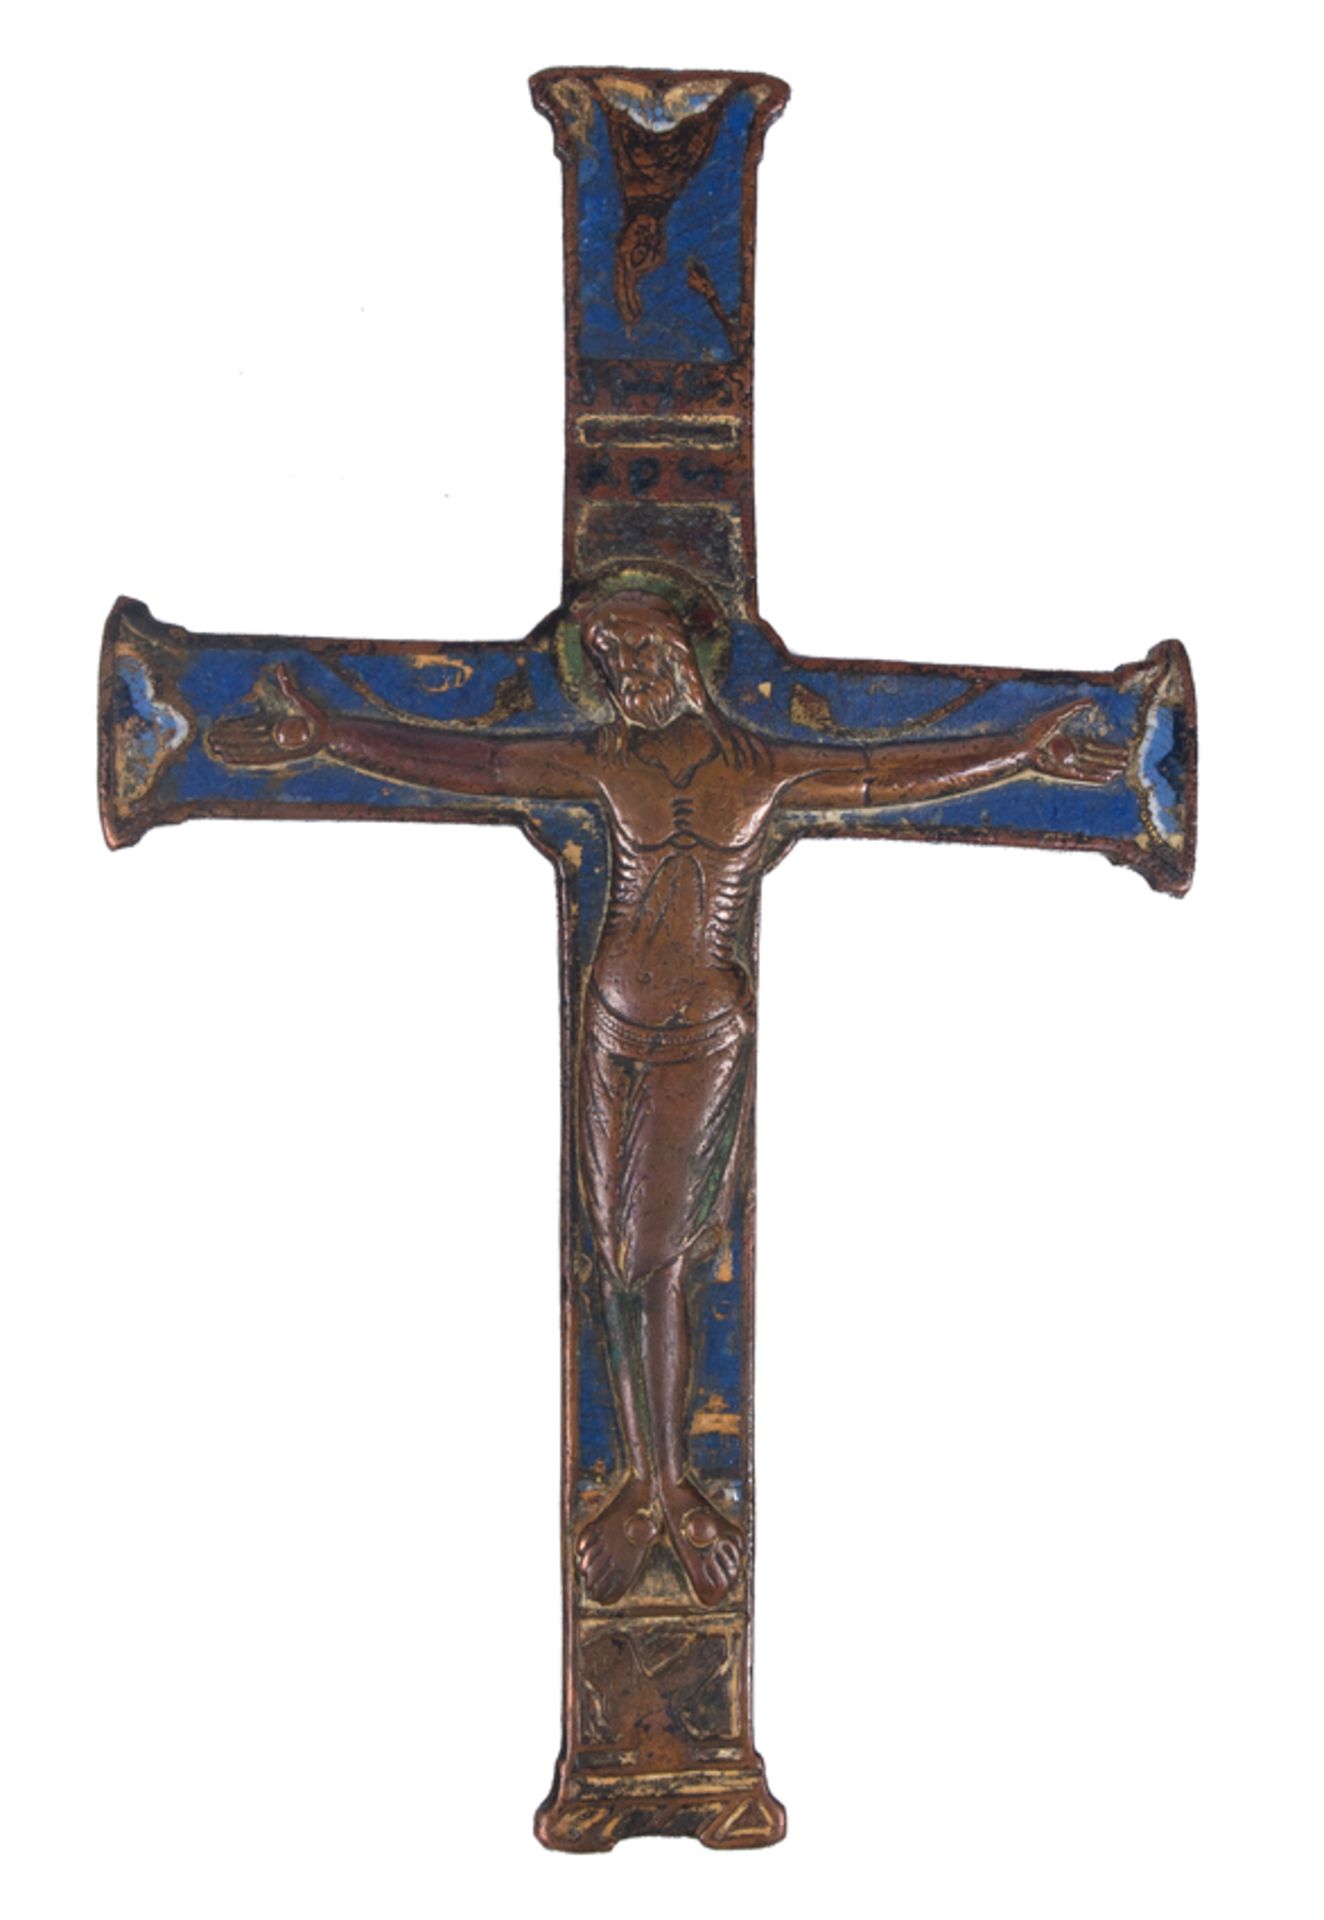 Magnificent cross with Christ alive, in copper with traces of gilding, chiselled and decorated with